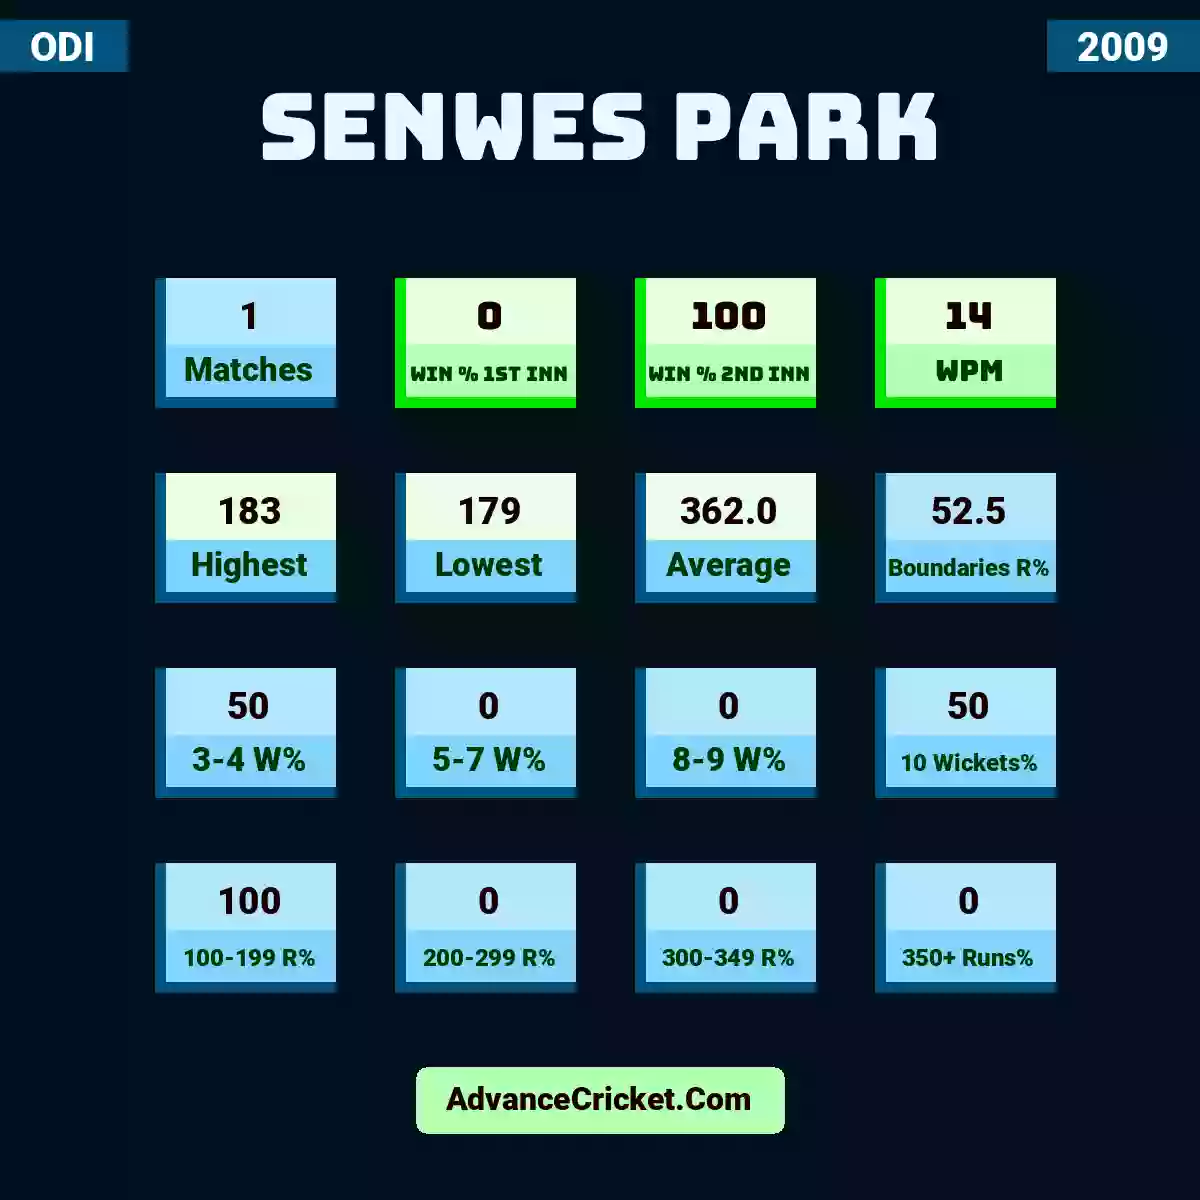 Image showing Senwes Park with Matches: 1, Win % 1st Inn: 0, Win % 2nd Inn: 100, WPM: 14, Highest: 183, Lowest: 179, Average: 362.0, Boundaries R%: 52.5, 3-4 W%: 50, 5-7 W%: 0, 8-9 W%: 0, 10 Wickets%: 50, 100-199 R%: 100, 200-299 R%: 0, 300-349 R%: 0, 350+ Runs%: 0.